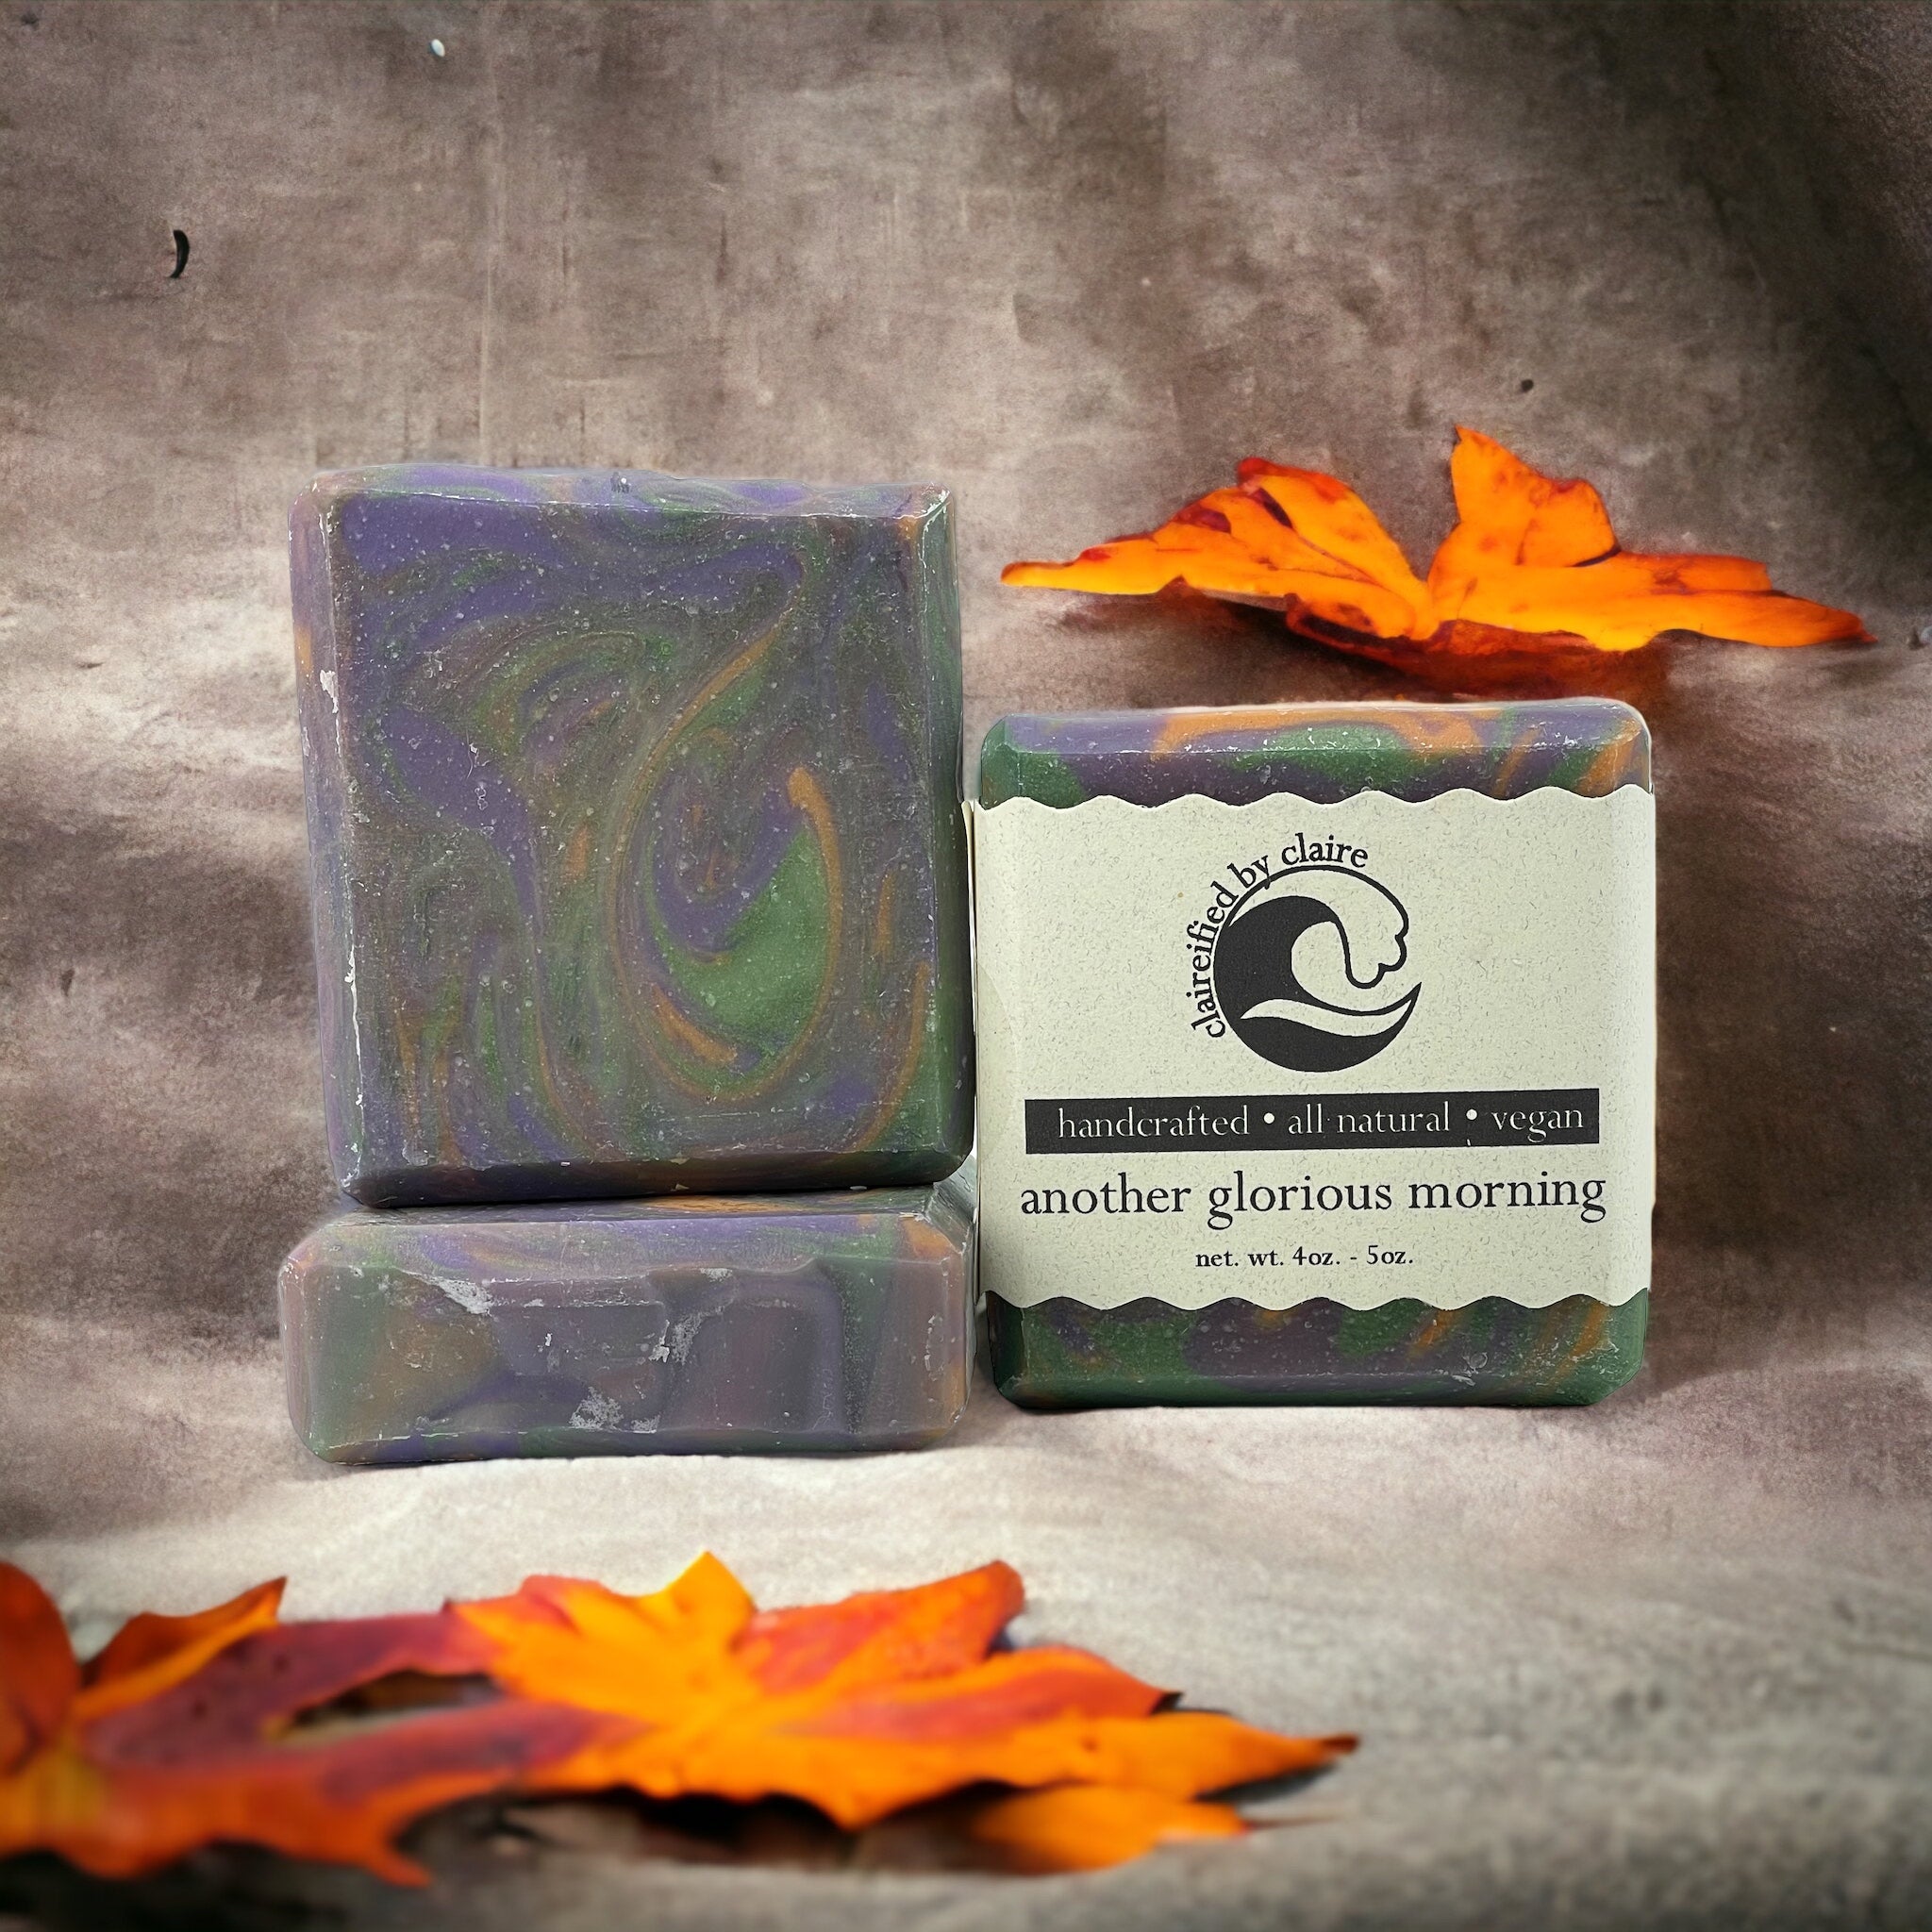 Another Glorius Morning handmade soap inspired by Winifred Sanderson of Hocus Pocus